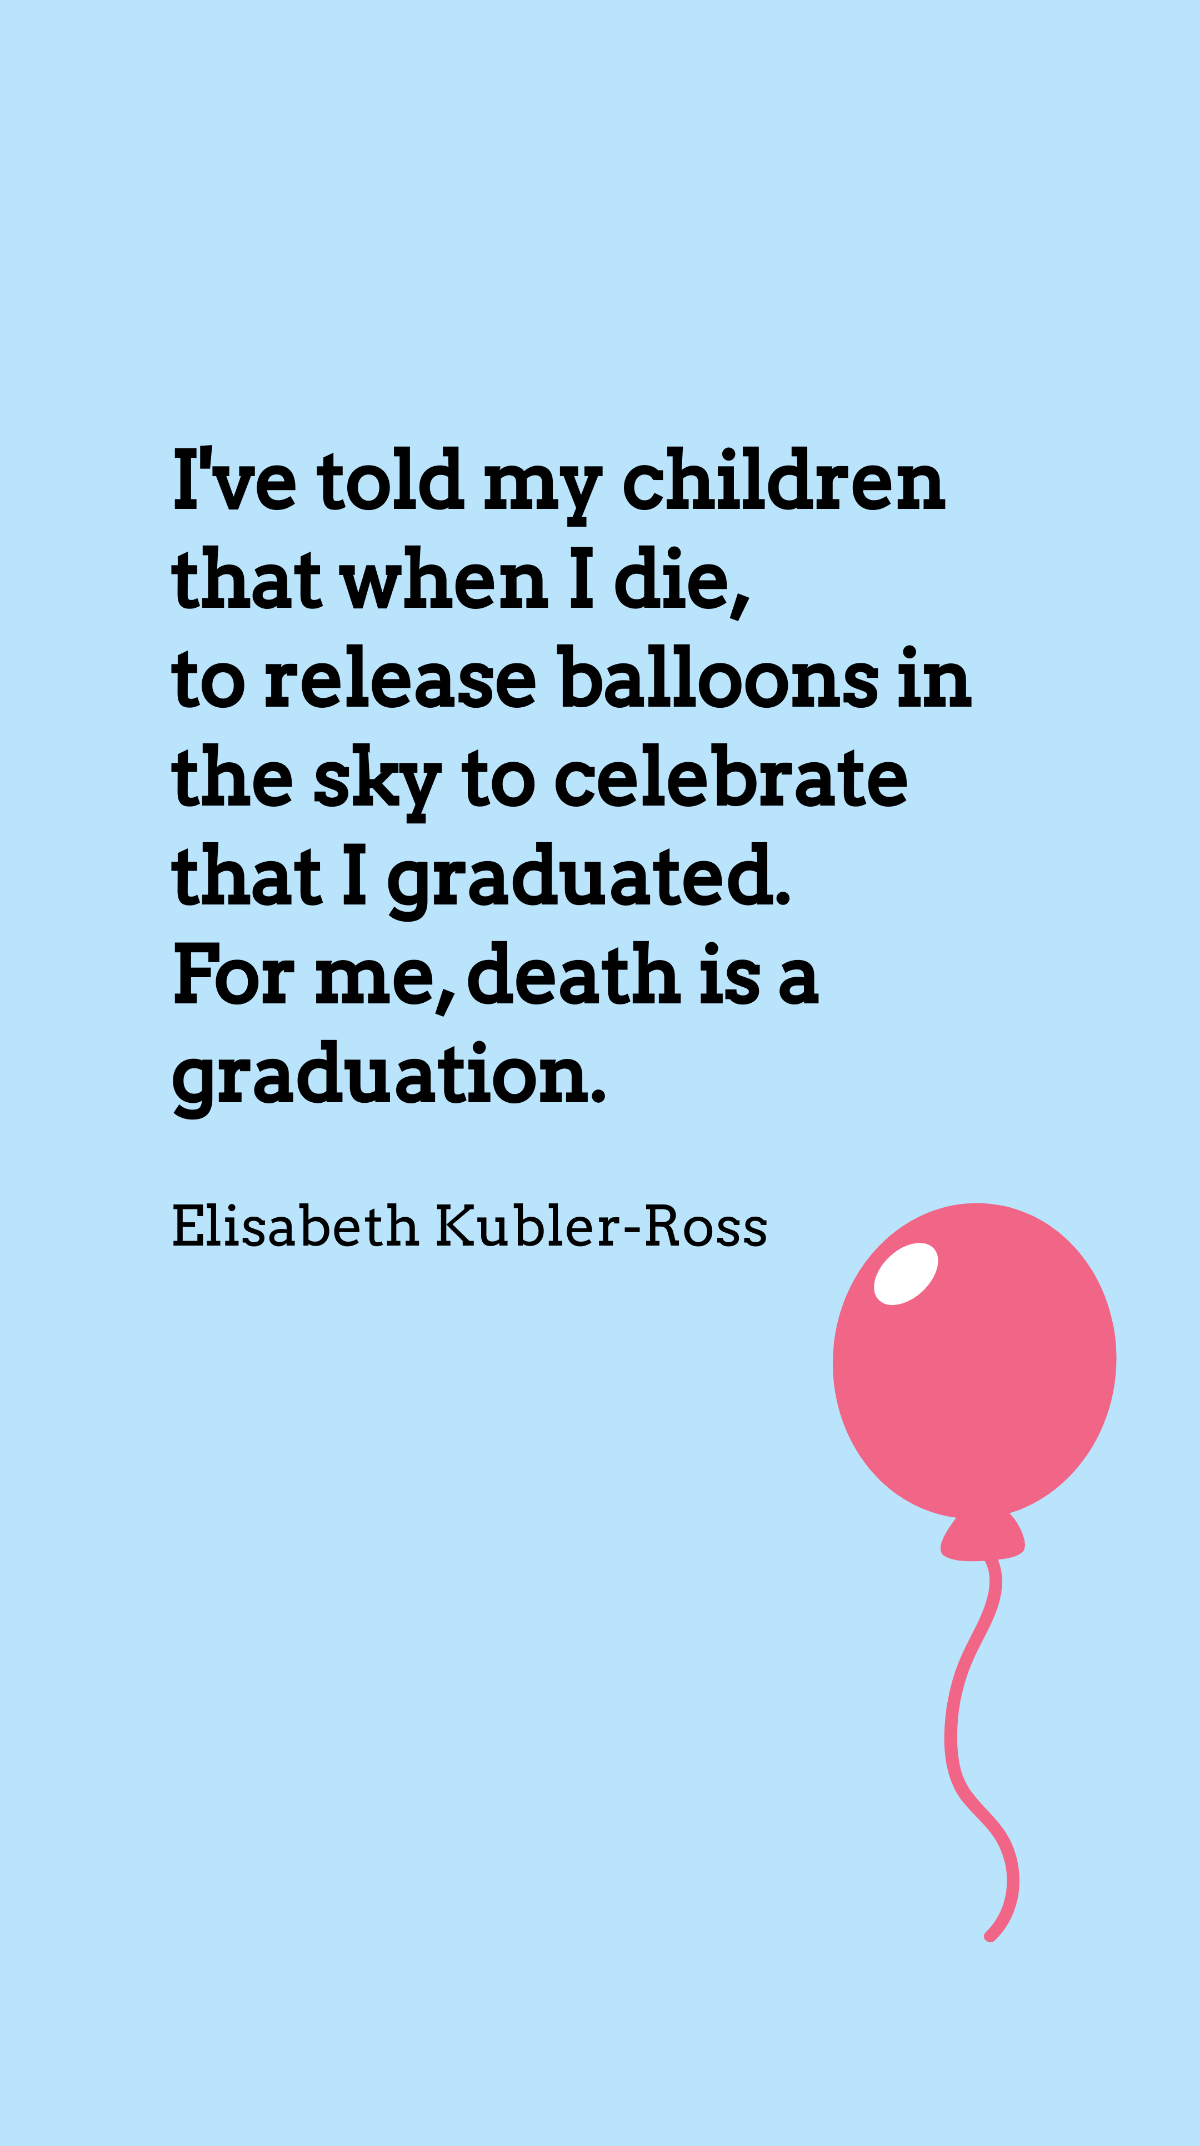 Free Elisabeth Kubler-Ross - I've told my children that when I die, to release balloons in the sky to celebrate that I graduated. For me, death is a graduation. Template